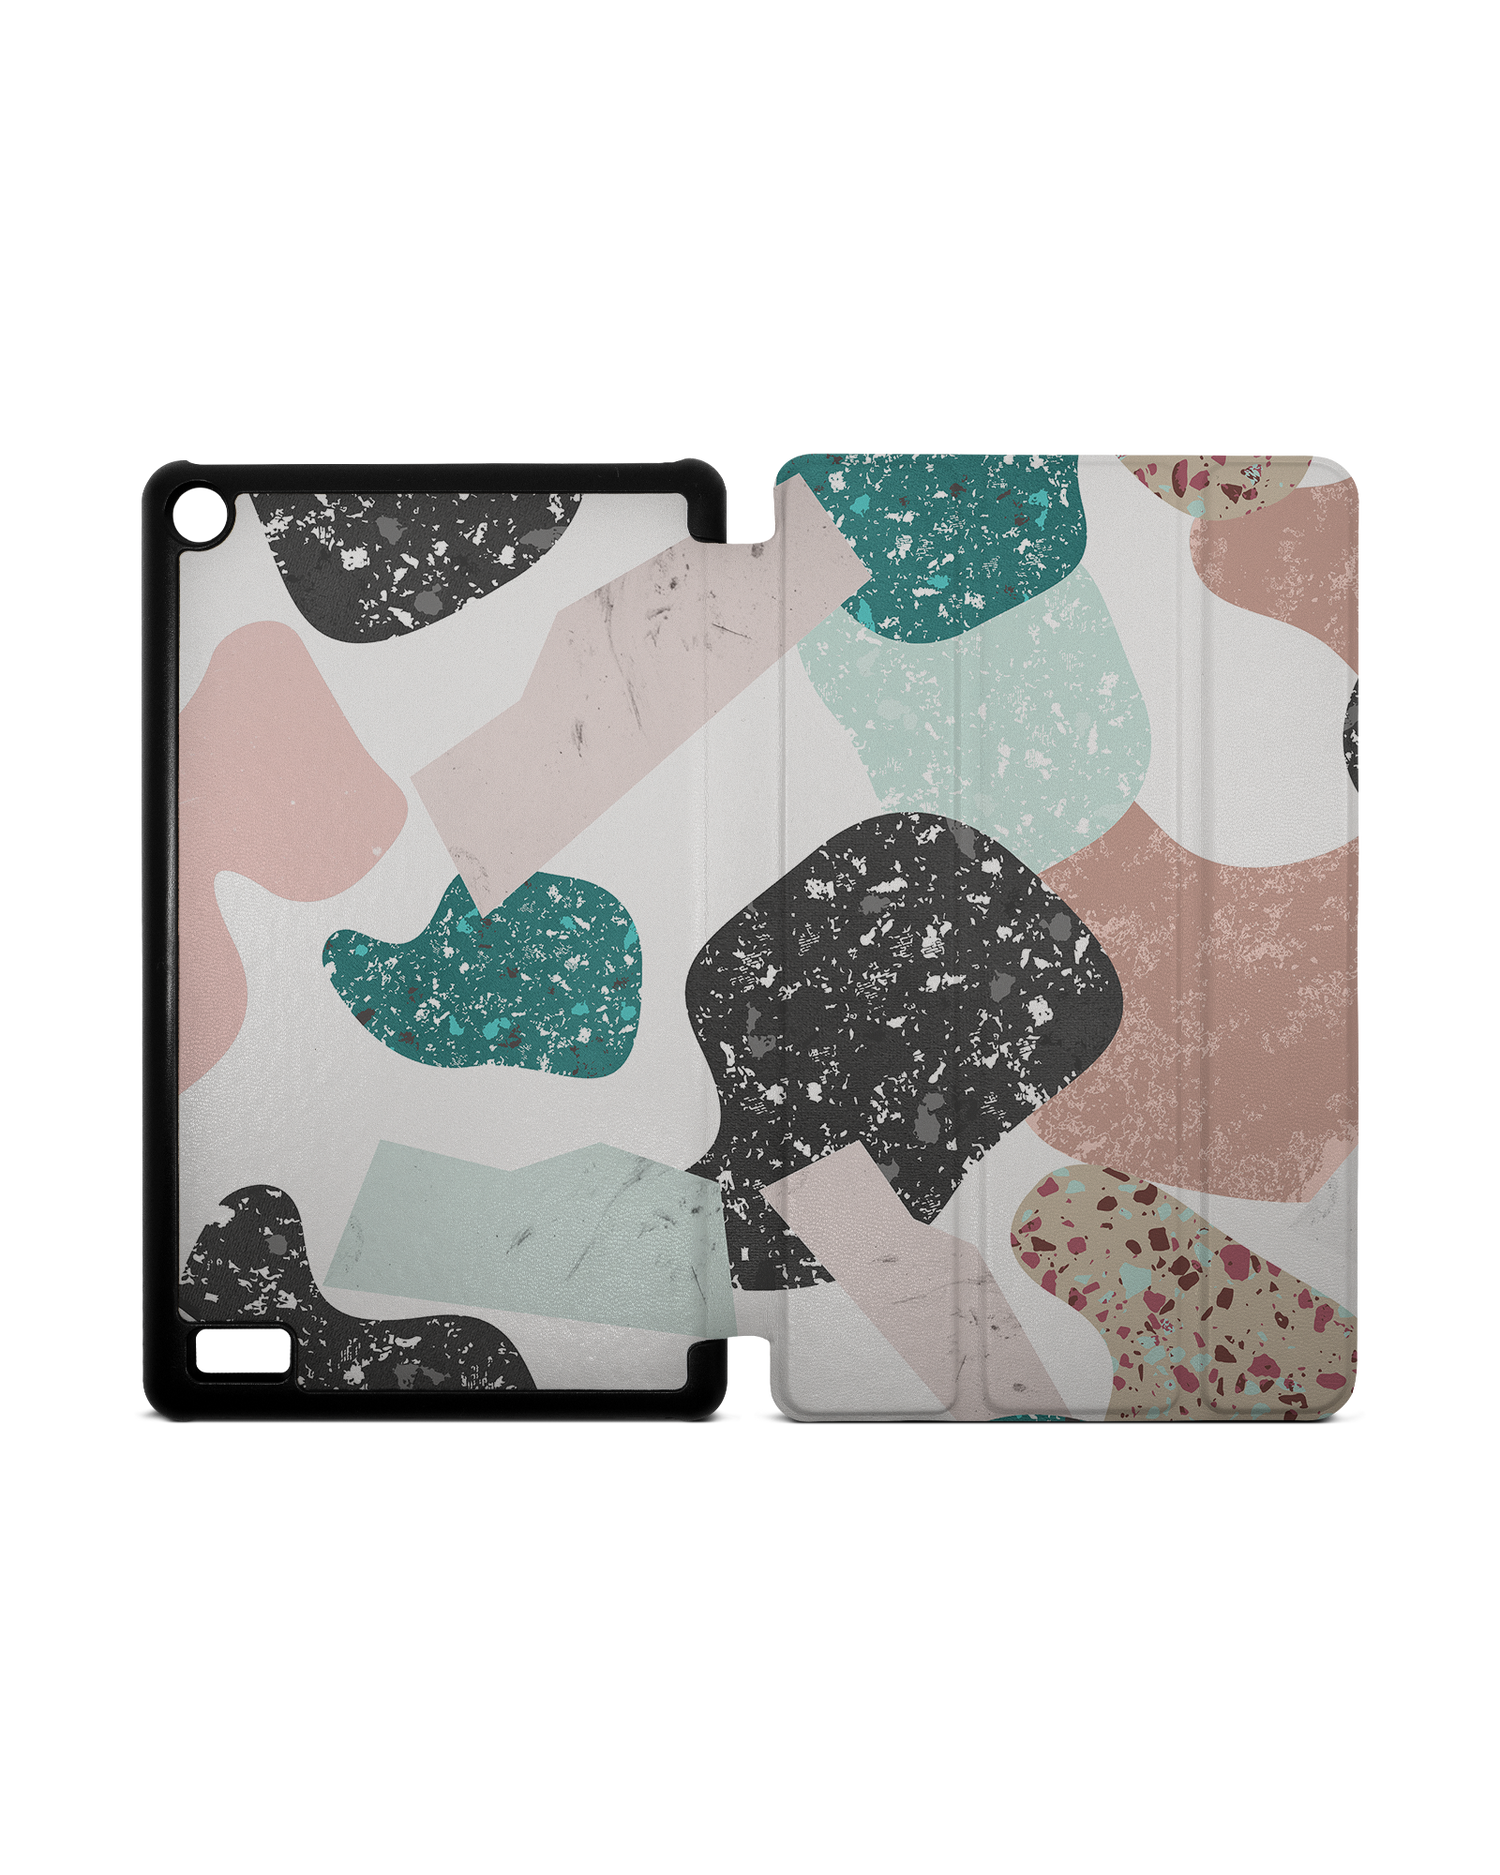 Scattered Shapes Tablet Smart Case for Amazon Fire 7: Opened